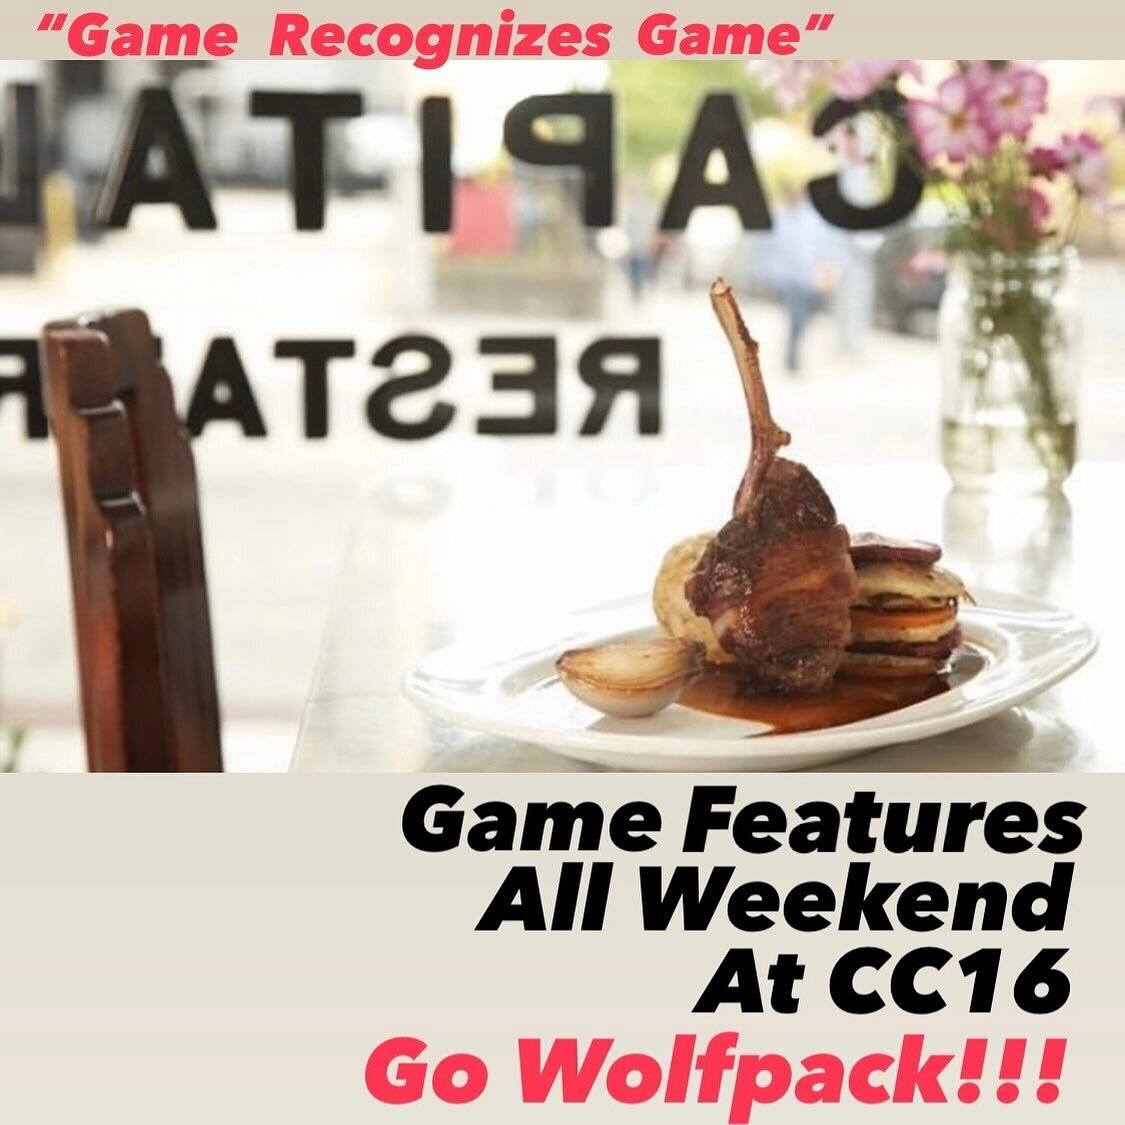 Game on and good luck to #wolfpackbasketball CC16 will be serving up the game on our end&hellip;venison chops and English style game pie for dinner this weekend.

#ncstate 
#raleigh 
#downtownraleigh 
#accbasketball 
#ncaabasketball